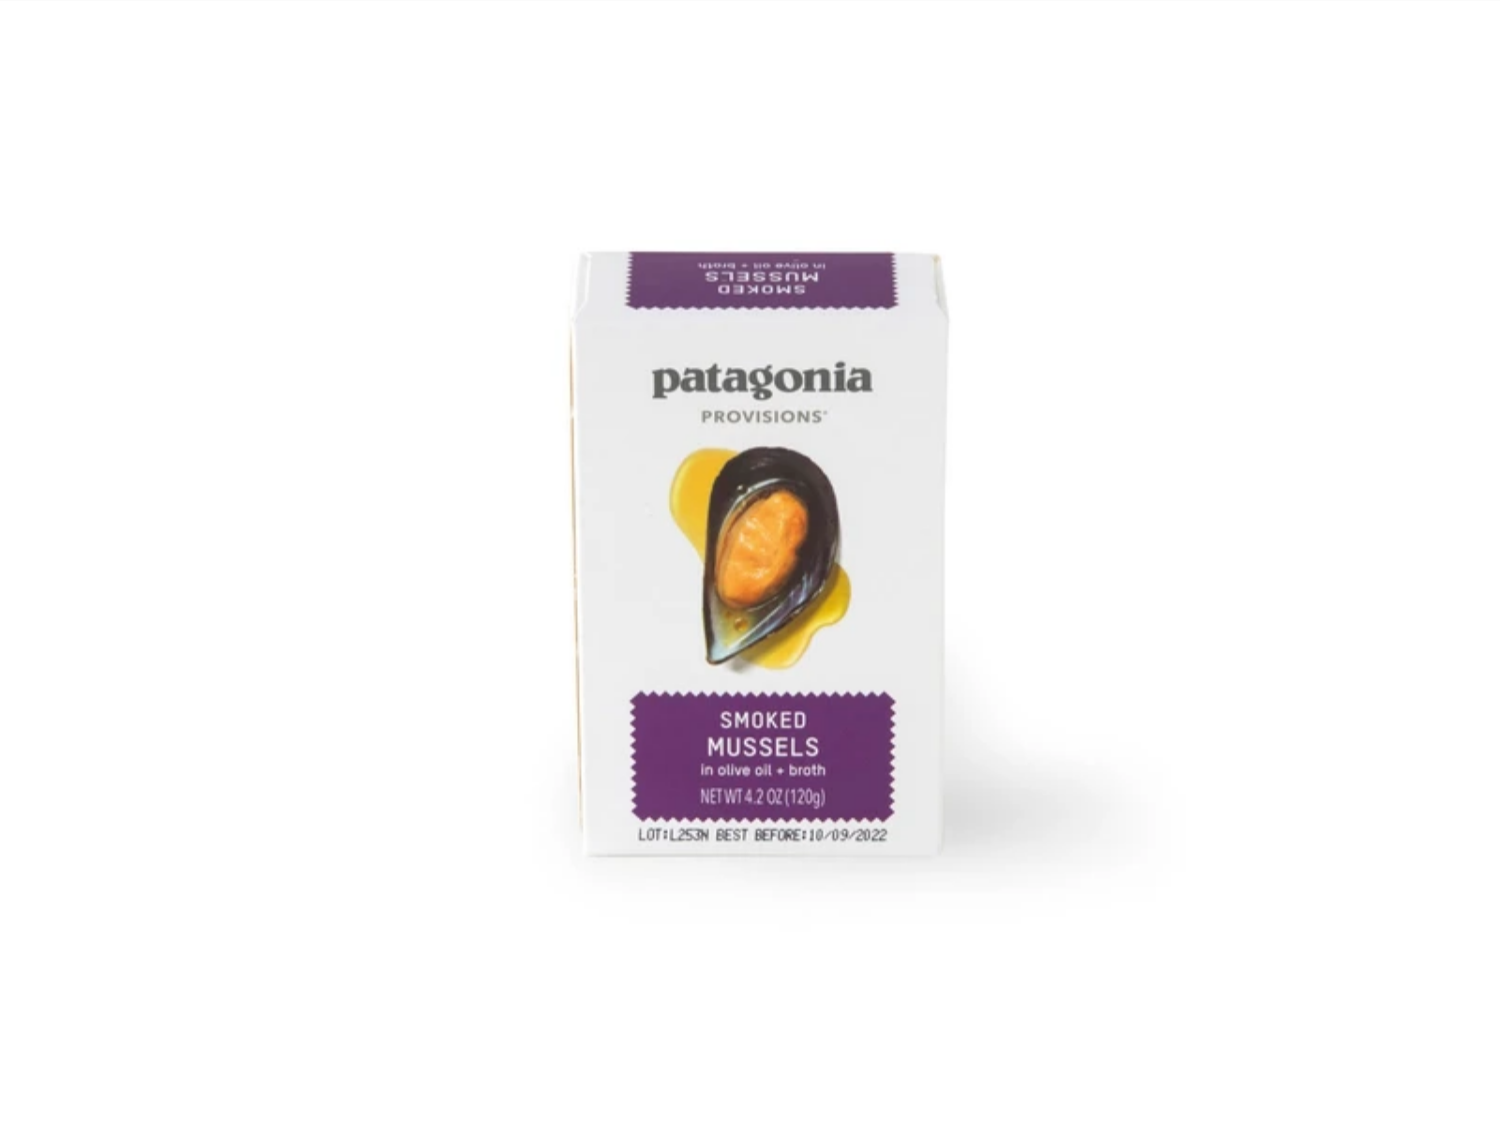 Patagonia Provisions - Mussels (Assorted Flavors) - 4.2 oz. Can Smoked - Harney & Sons Fine Teas